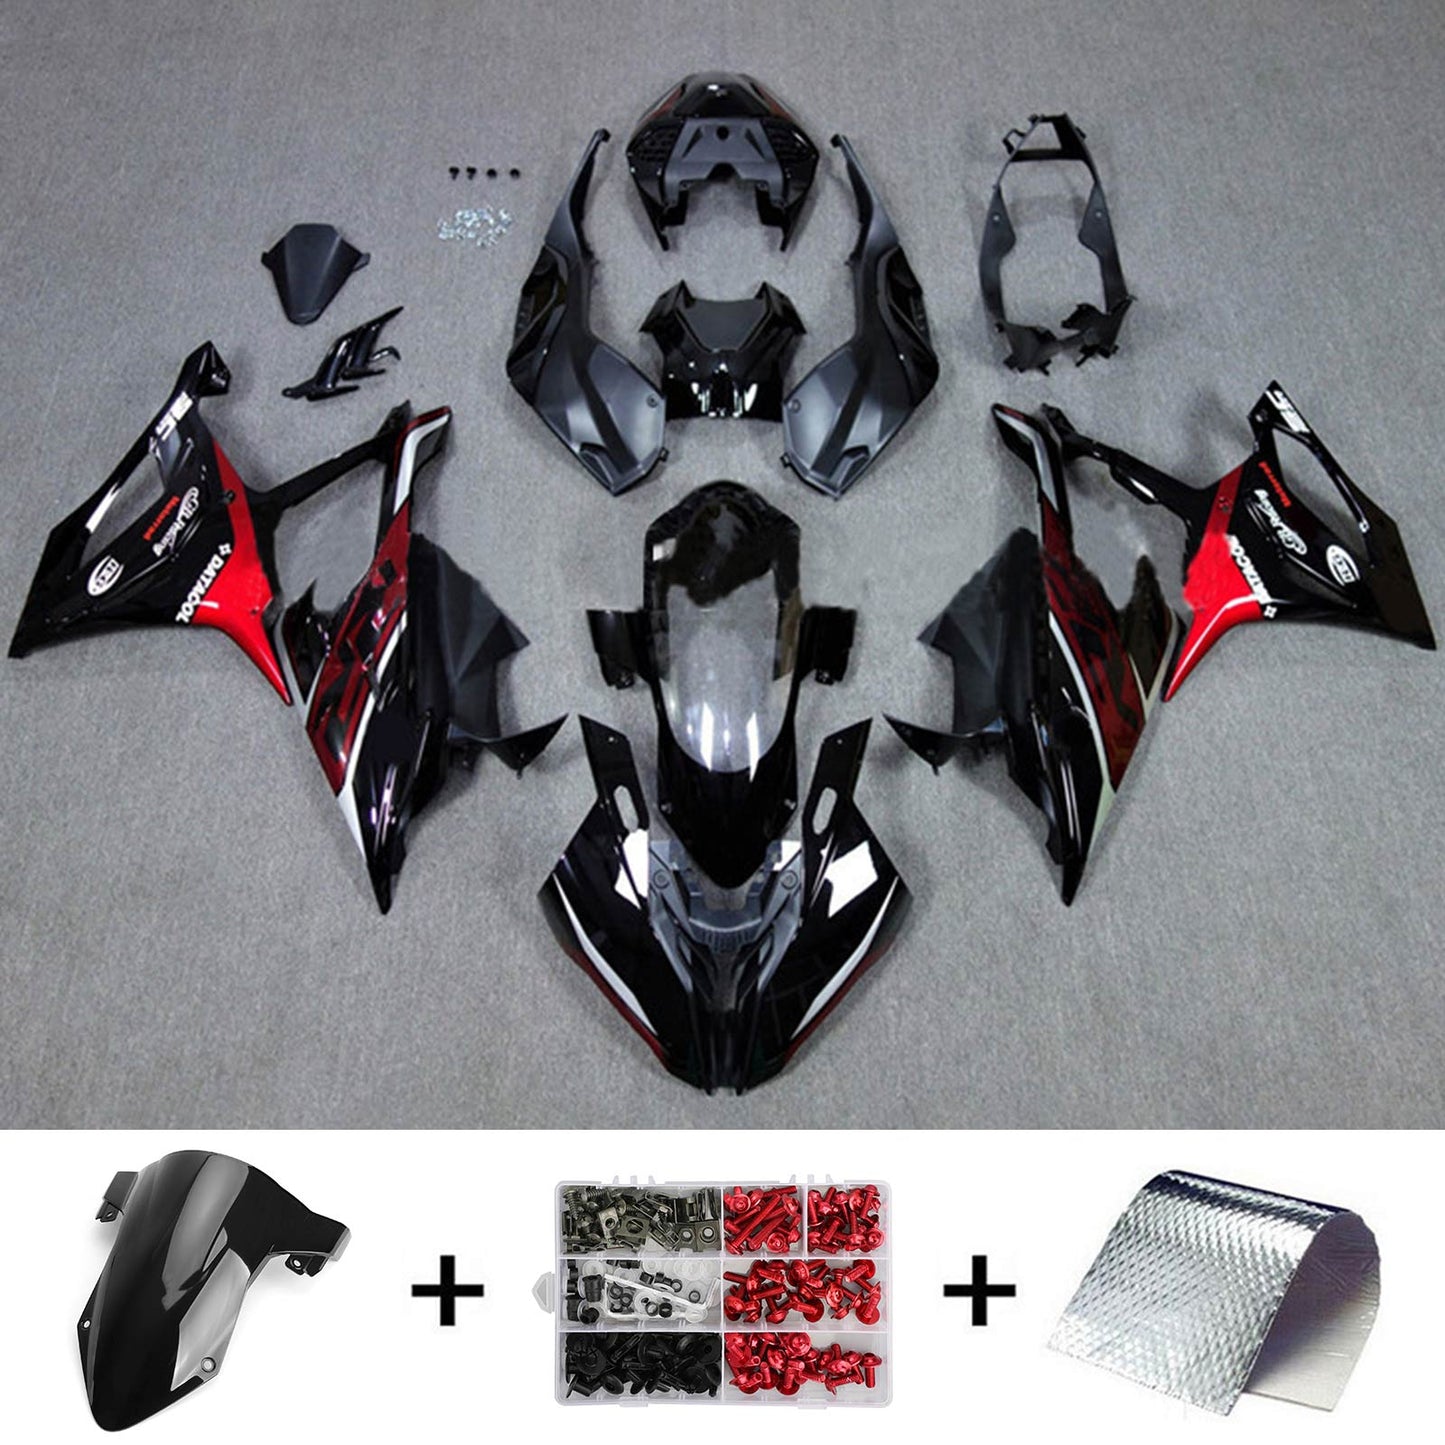 Amotopart 2019-2022 BMW S1000RR/M1000RR KIT ROSSO ROSSO DURO